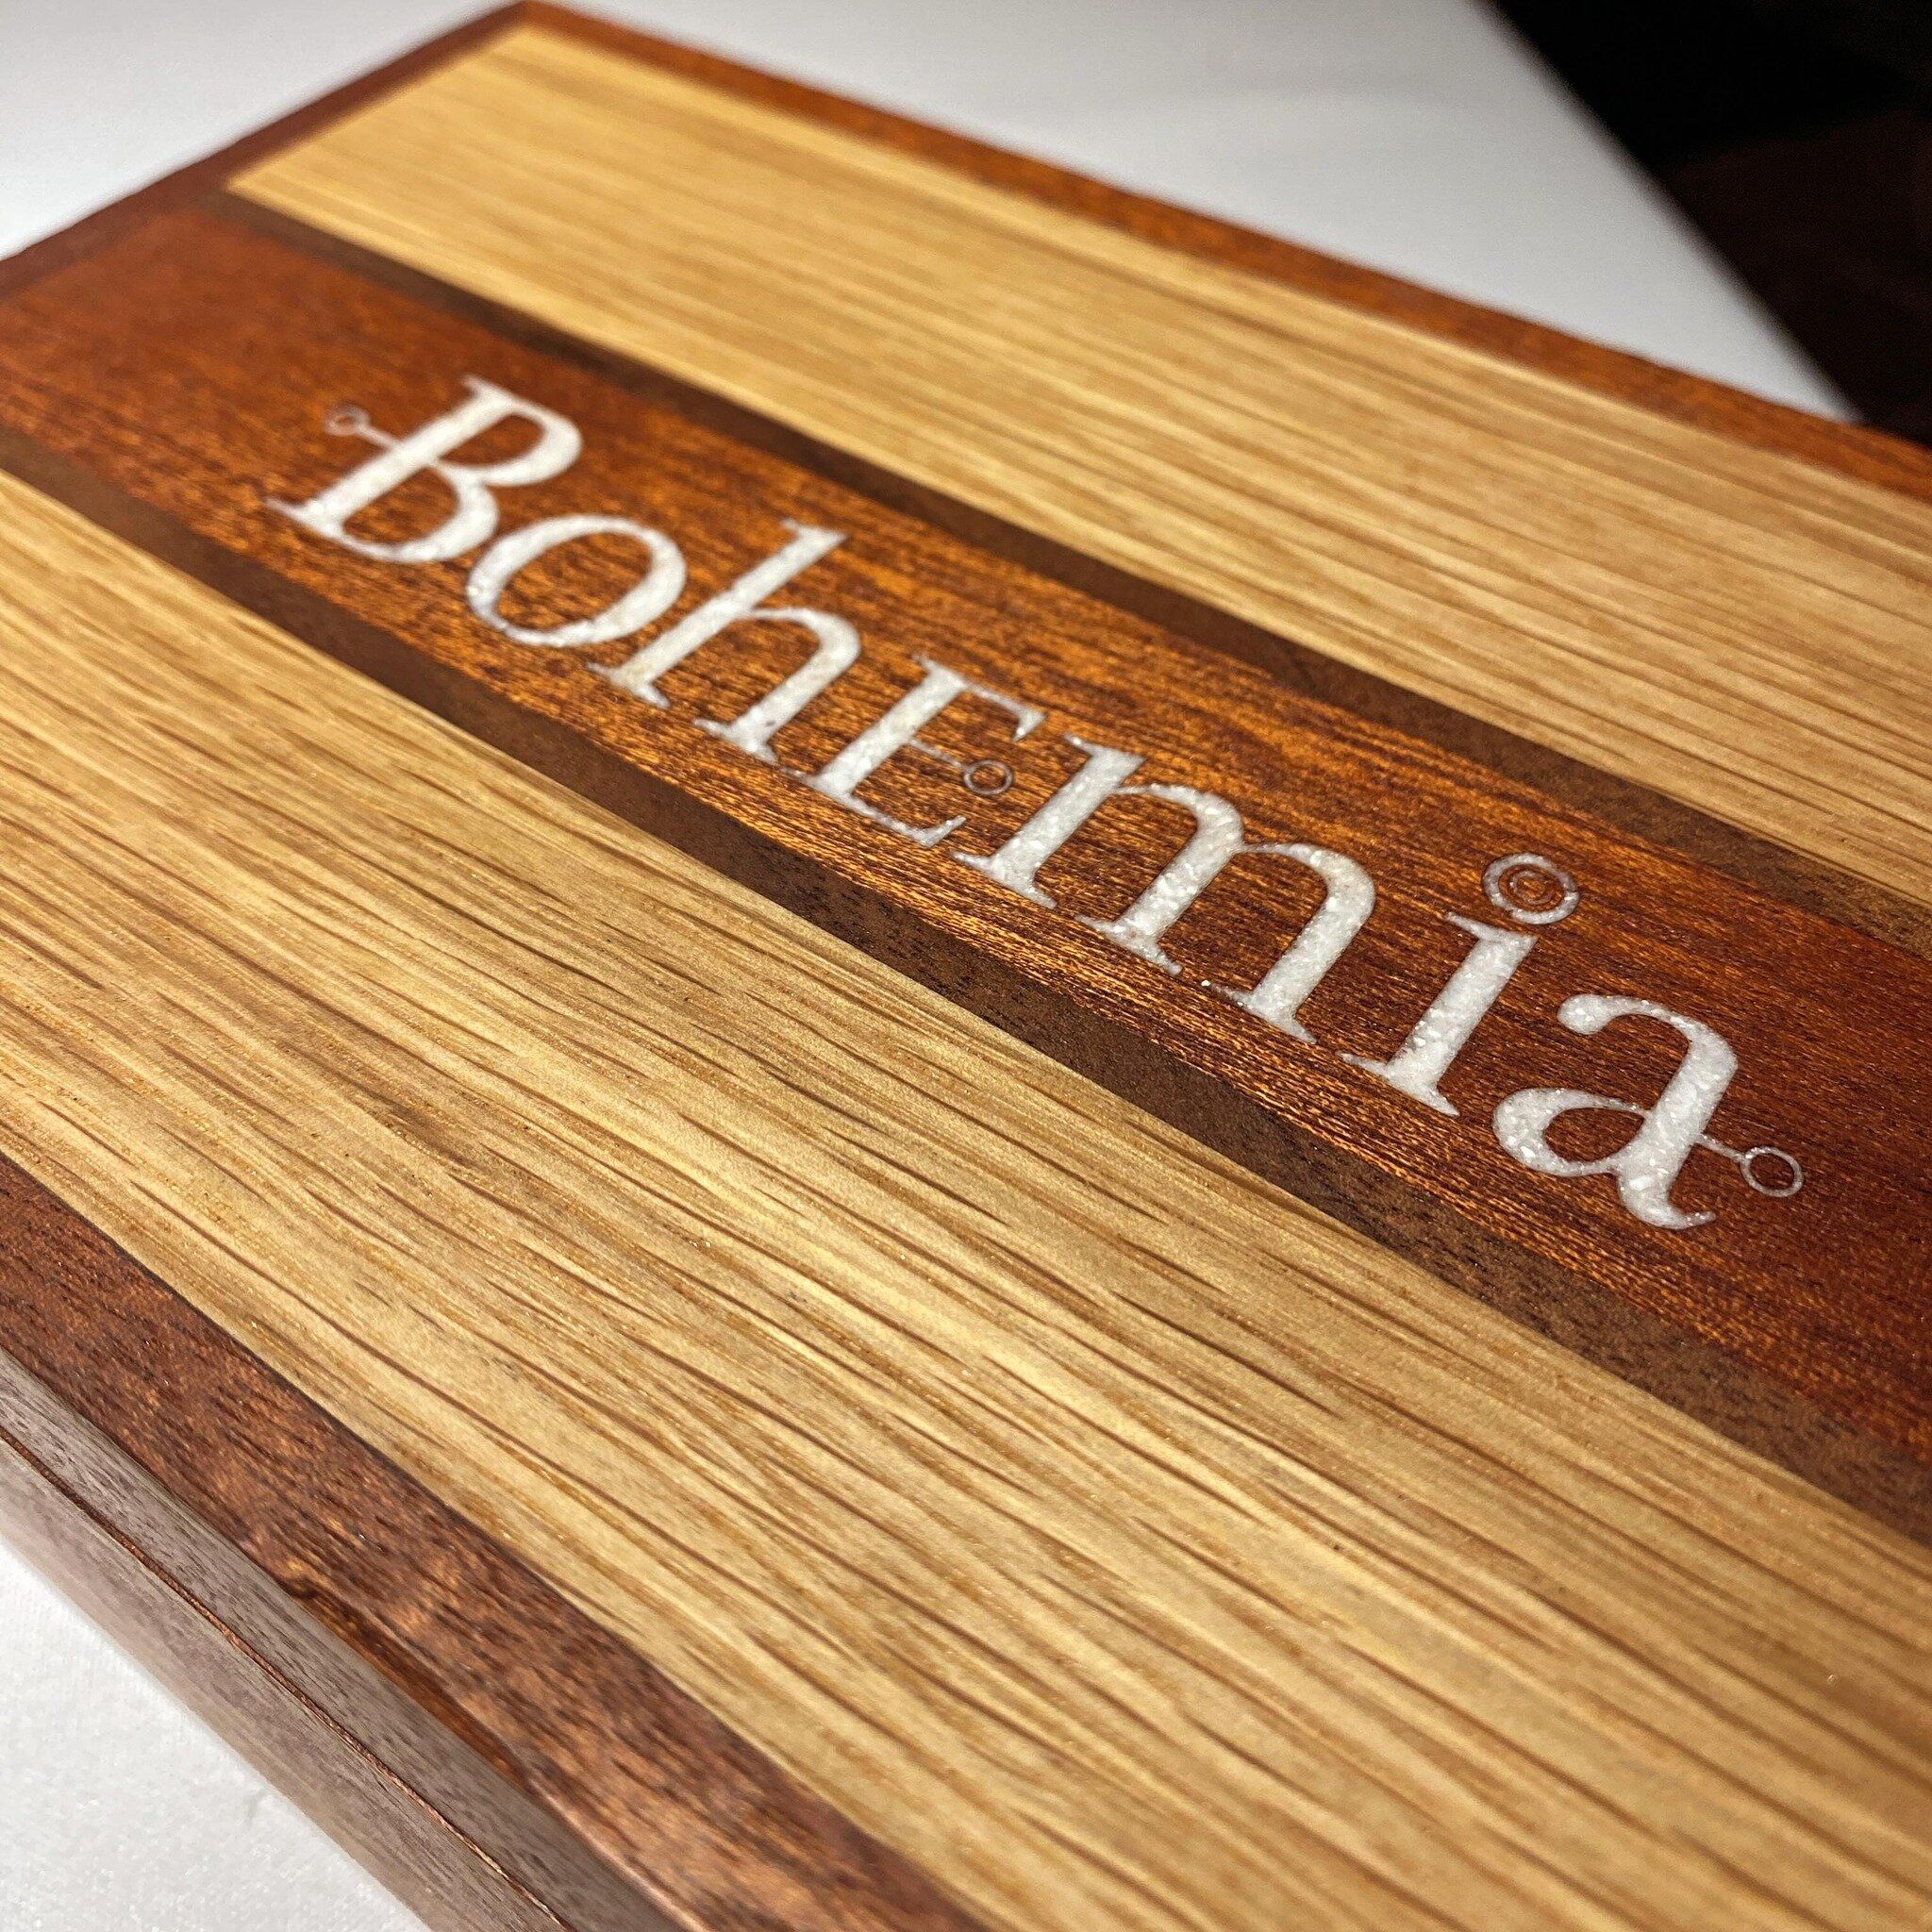 A special treat awaits at Bohemia restaurant. Can you guess what&rsquo;s inside?